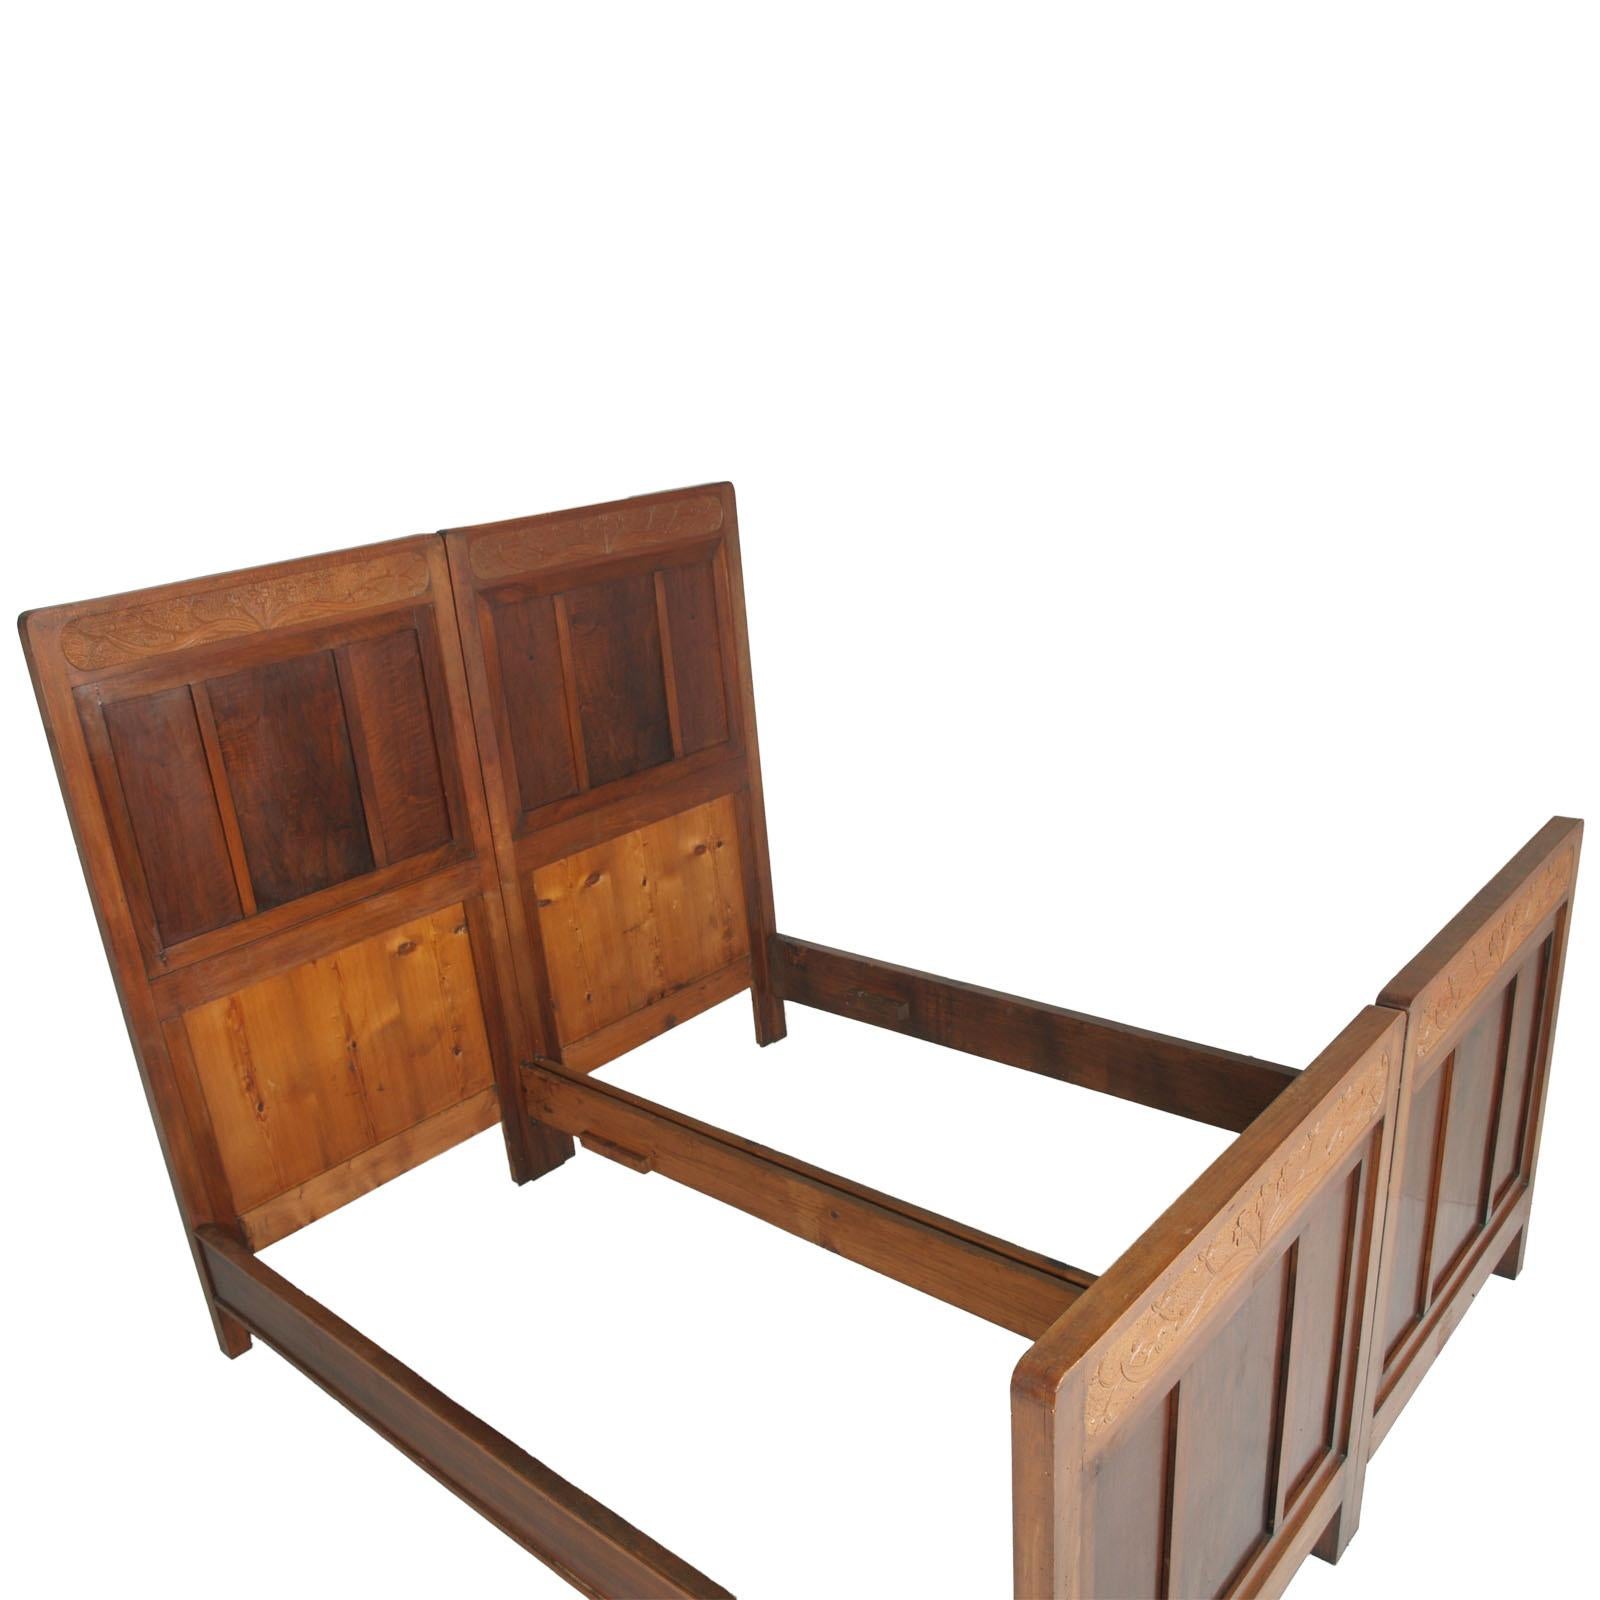 Antique Double Twin Bed, Art Nouveau, in Hand Carved Cherry Wood, Wax Polished For Sale 5